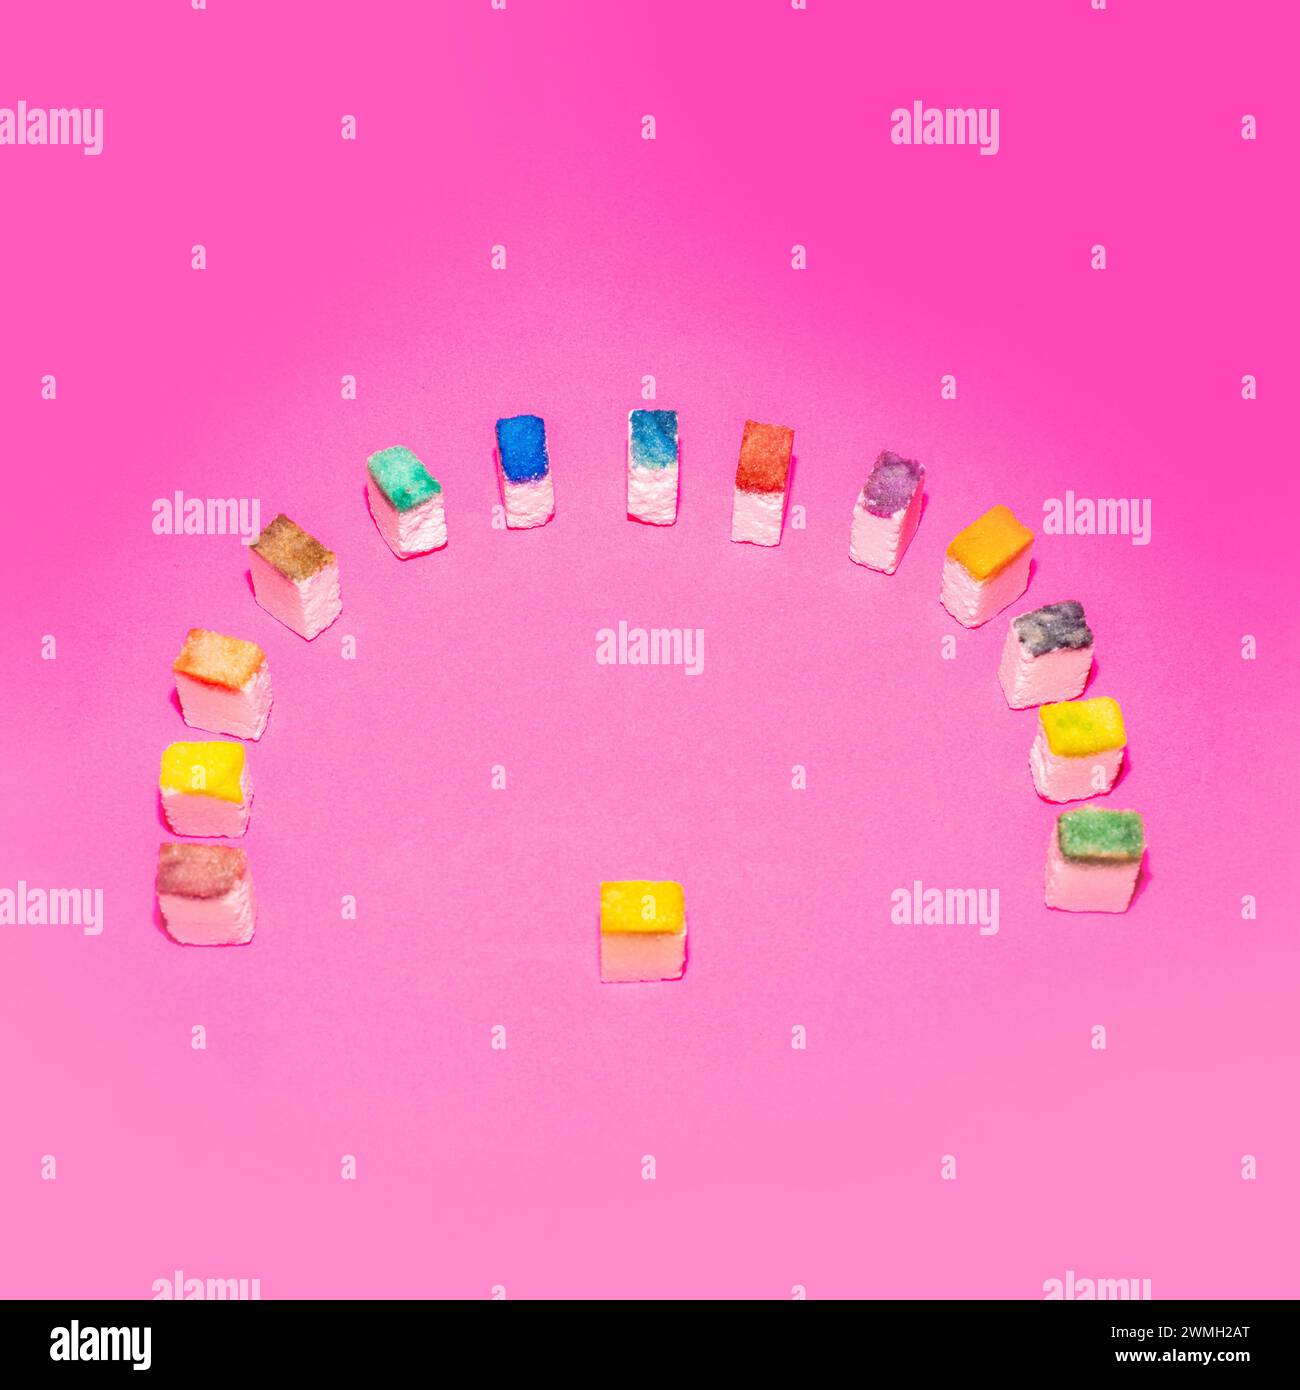 Colorful sugar cubes in the form of a crowd on a pink background. People metaphor. Creative food concept. Stock Photo